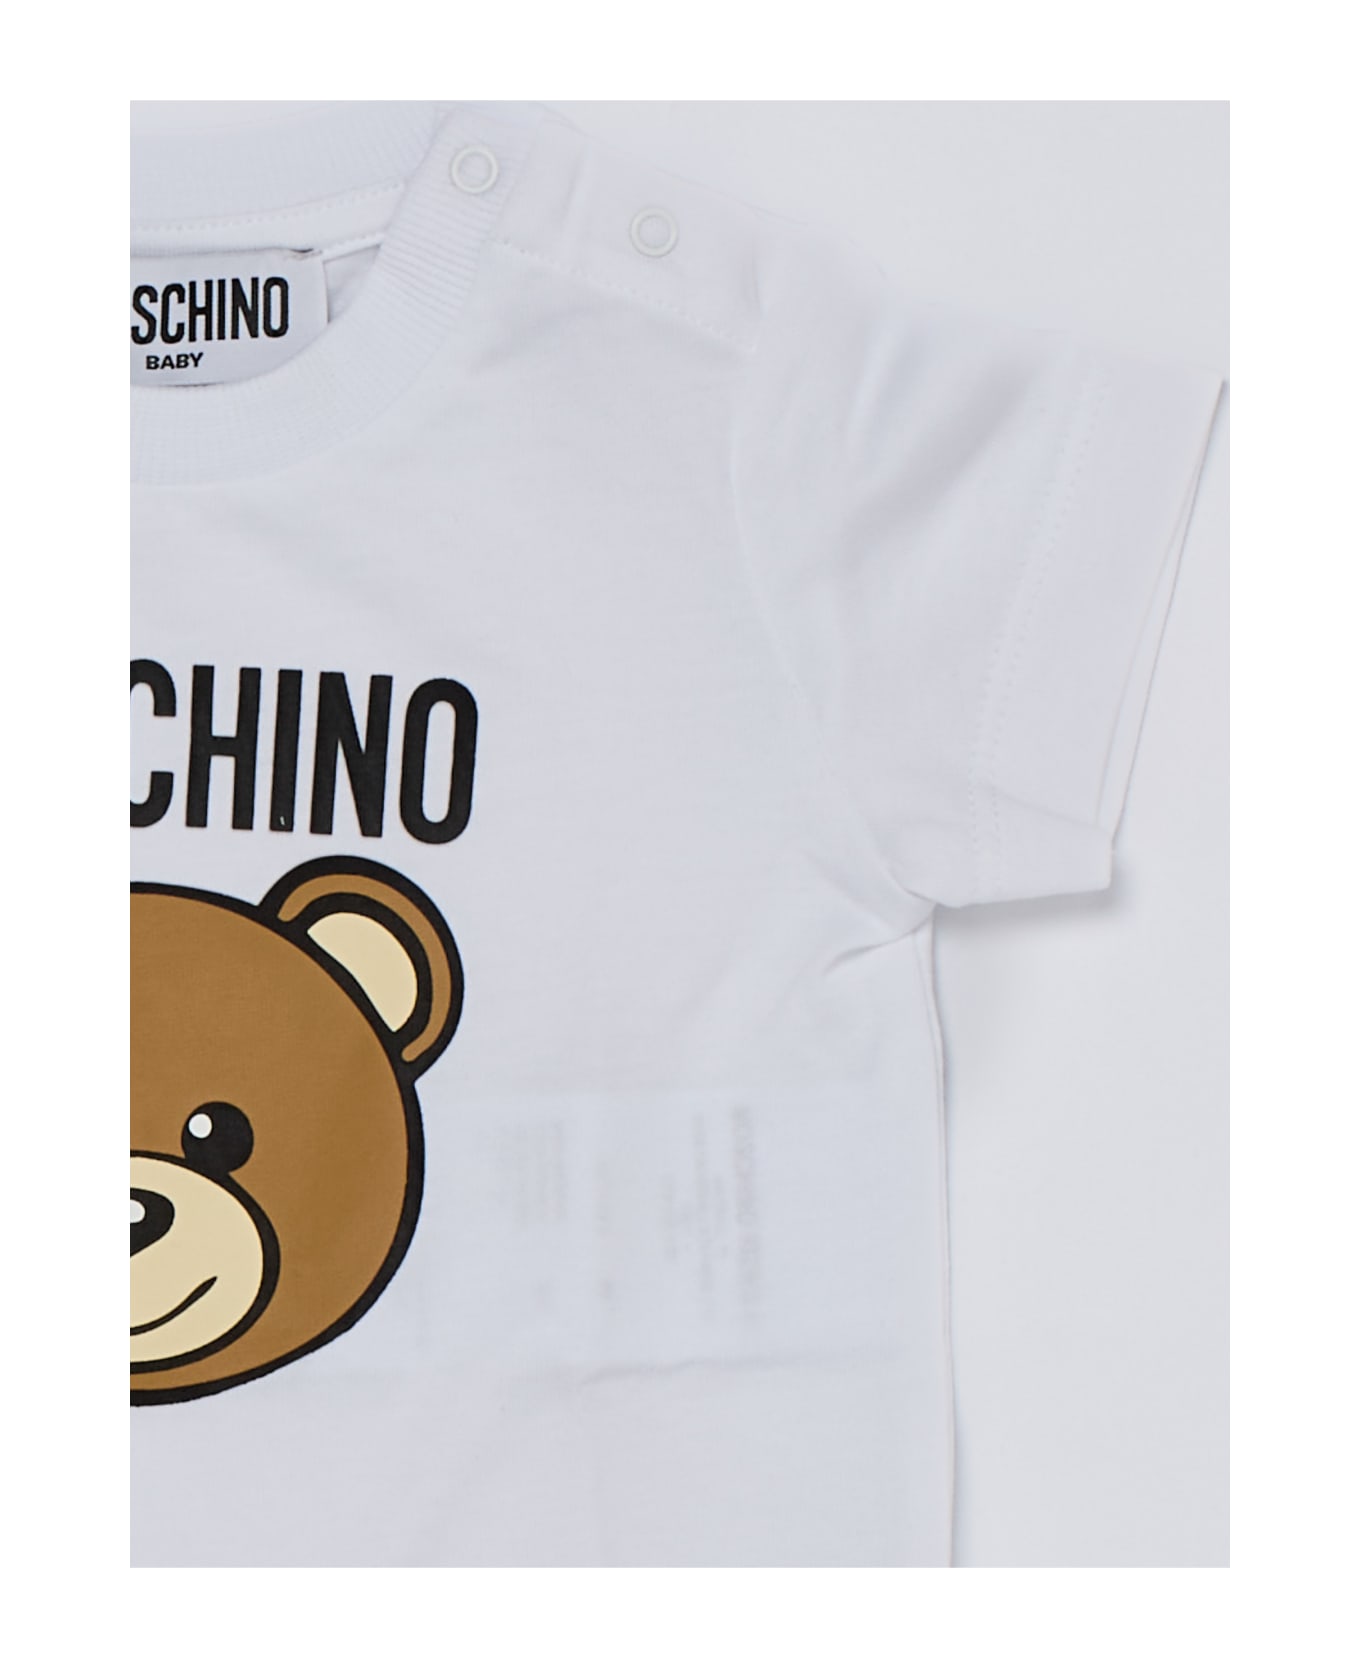 Moschino T-shirt+shorts Suit - BIANCO-ROSSO ボディスーツ＆セットアップ